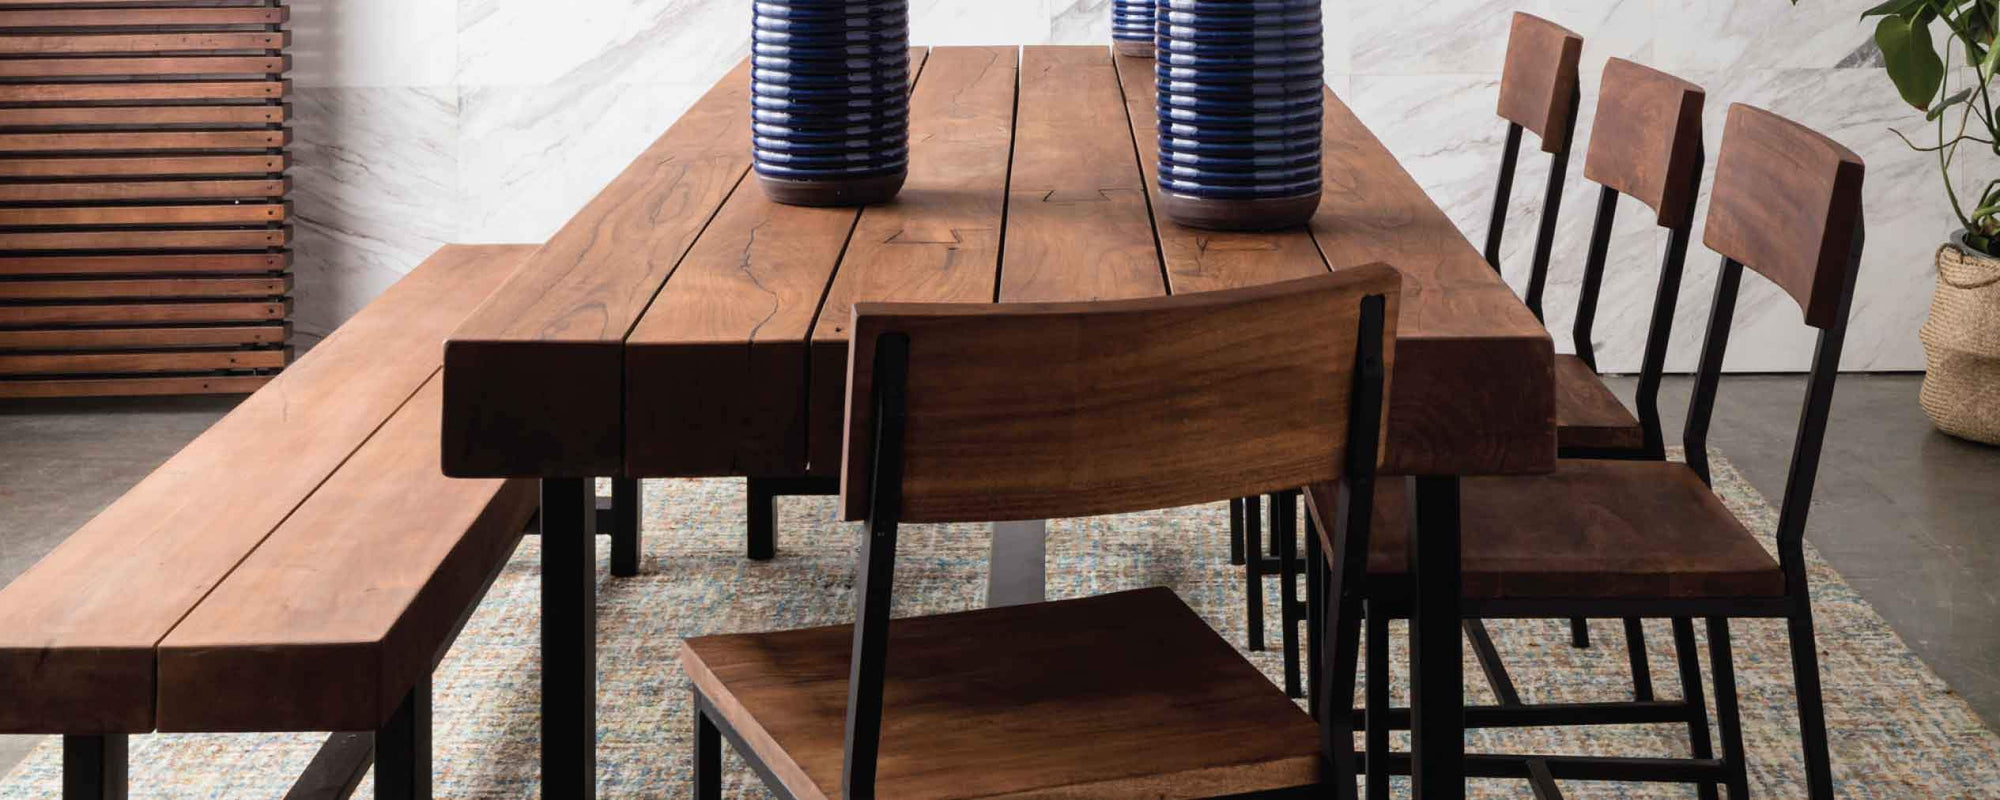 Industrial Dining Room Furniture